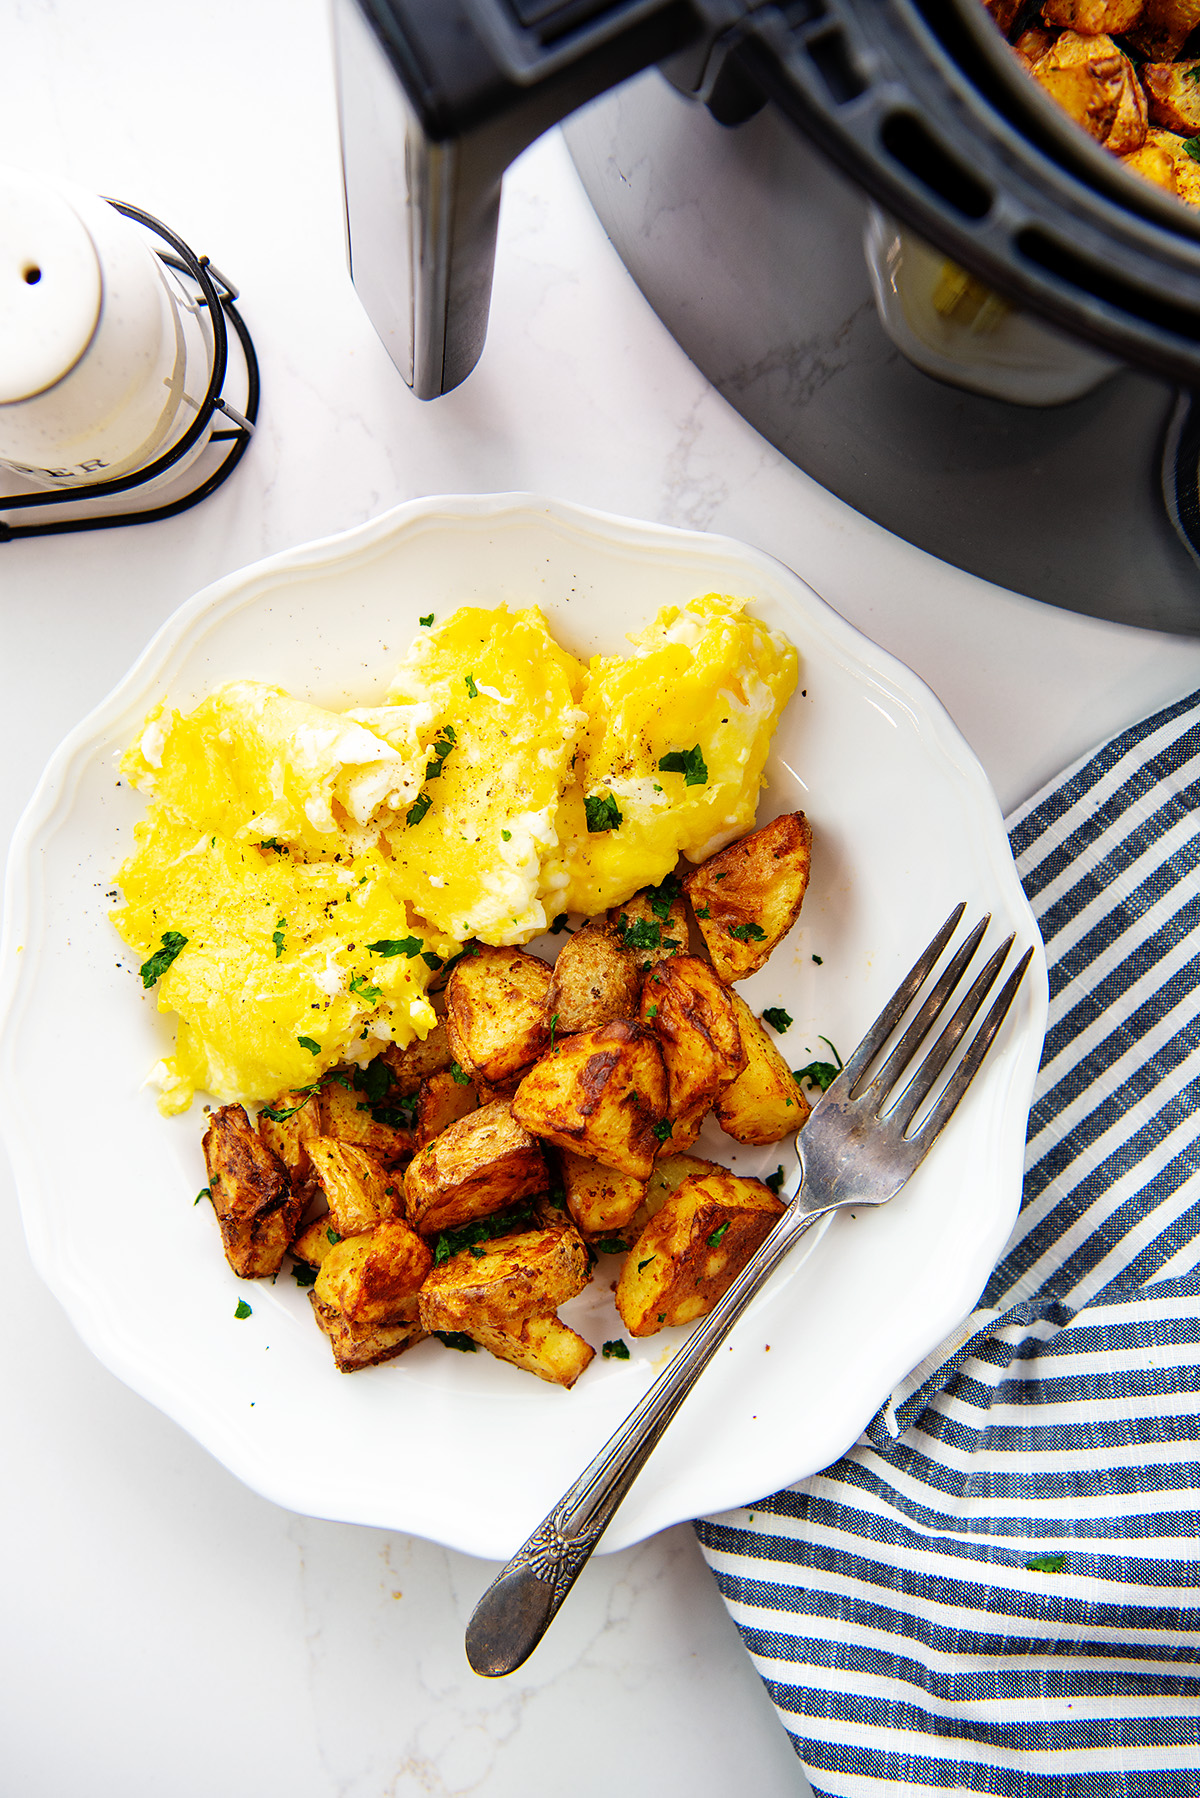 Overhead view of eggs and potatoes on a small white plate next to an air fryer basket.